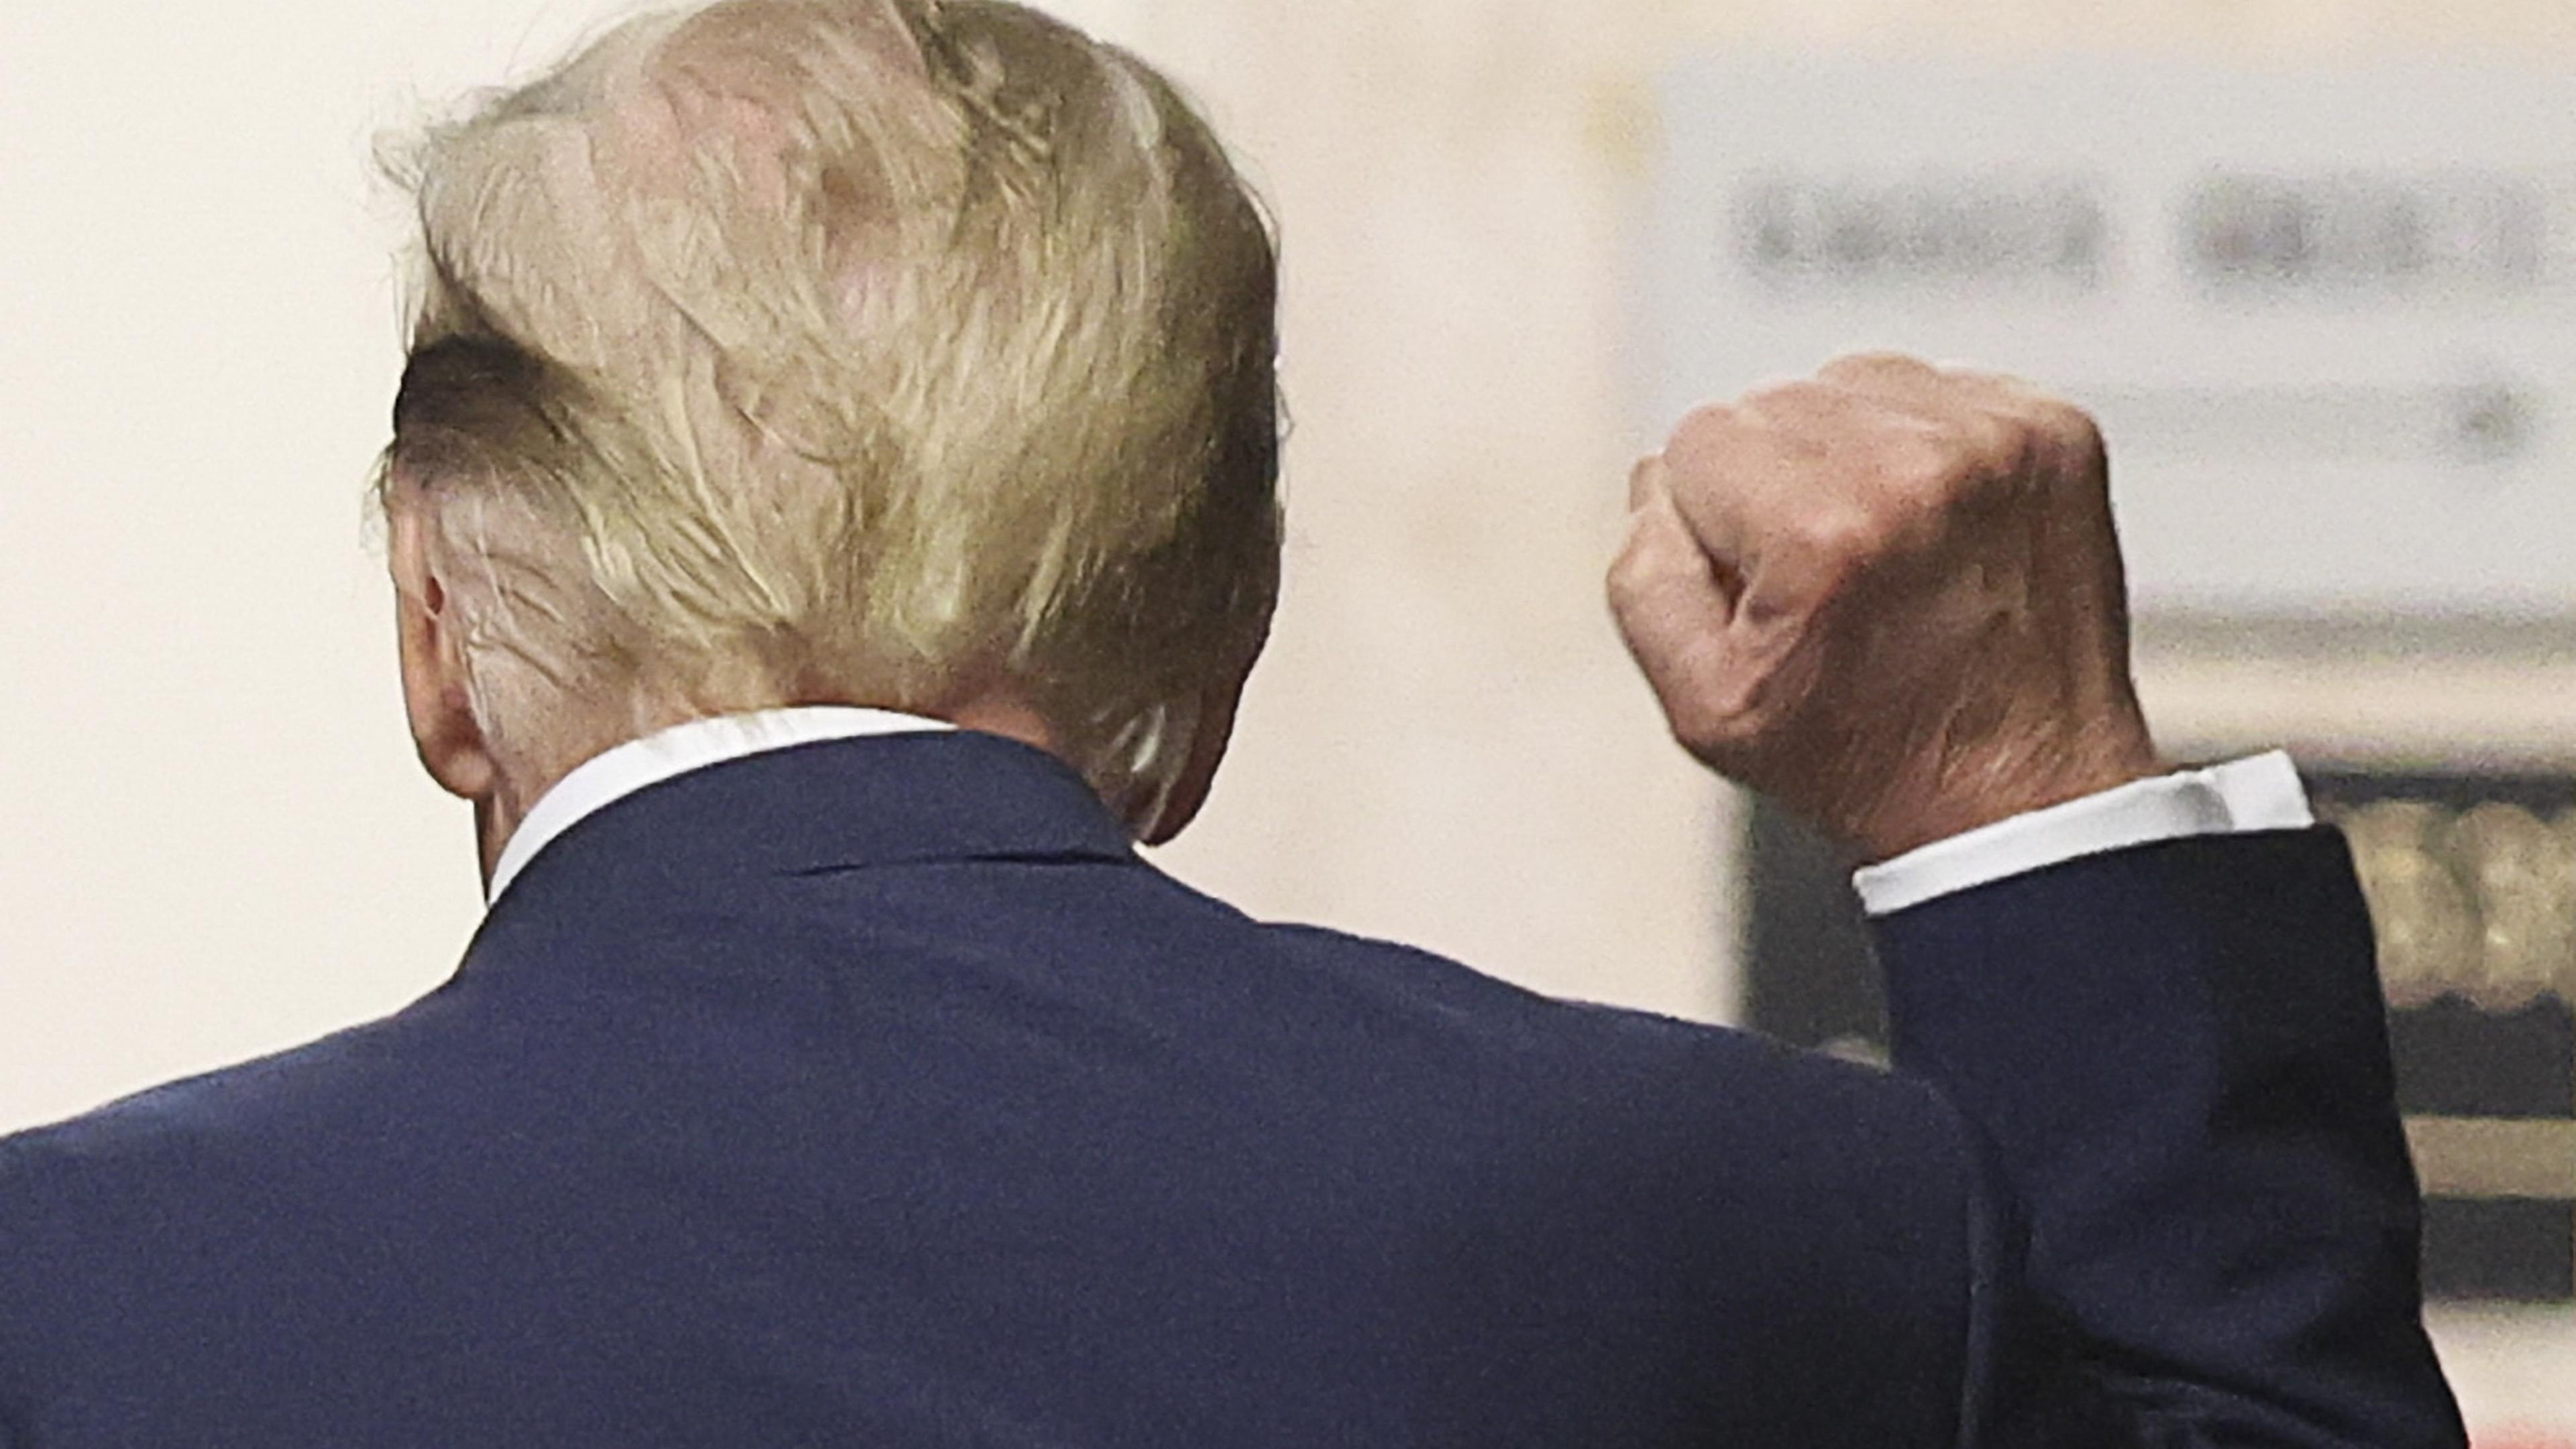 TOPSHOT - Former US President Donald Trump gestures in the hallway outside the courtroom during a recess in his trial for allegedly covering up hush money payments linked to extramarital affairs, at Manhattan Criminal Court in New York City on April 18, 2024. Trump's criminal trial resumes Thursday with Judge Juan Merchan seeking to complete jury selection. Moving the US into uncharted waters, it is the first criminal trial of a former US president, one who is also battling to retake the White House in November. (Photo by Brendan McDermid / POOL / AFP)